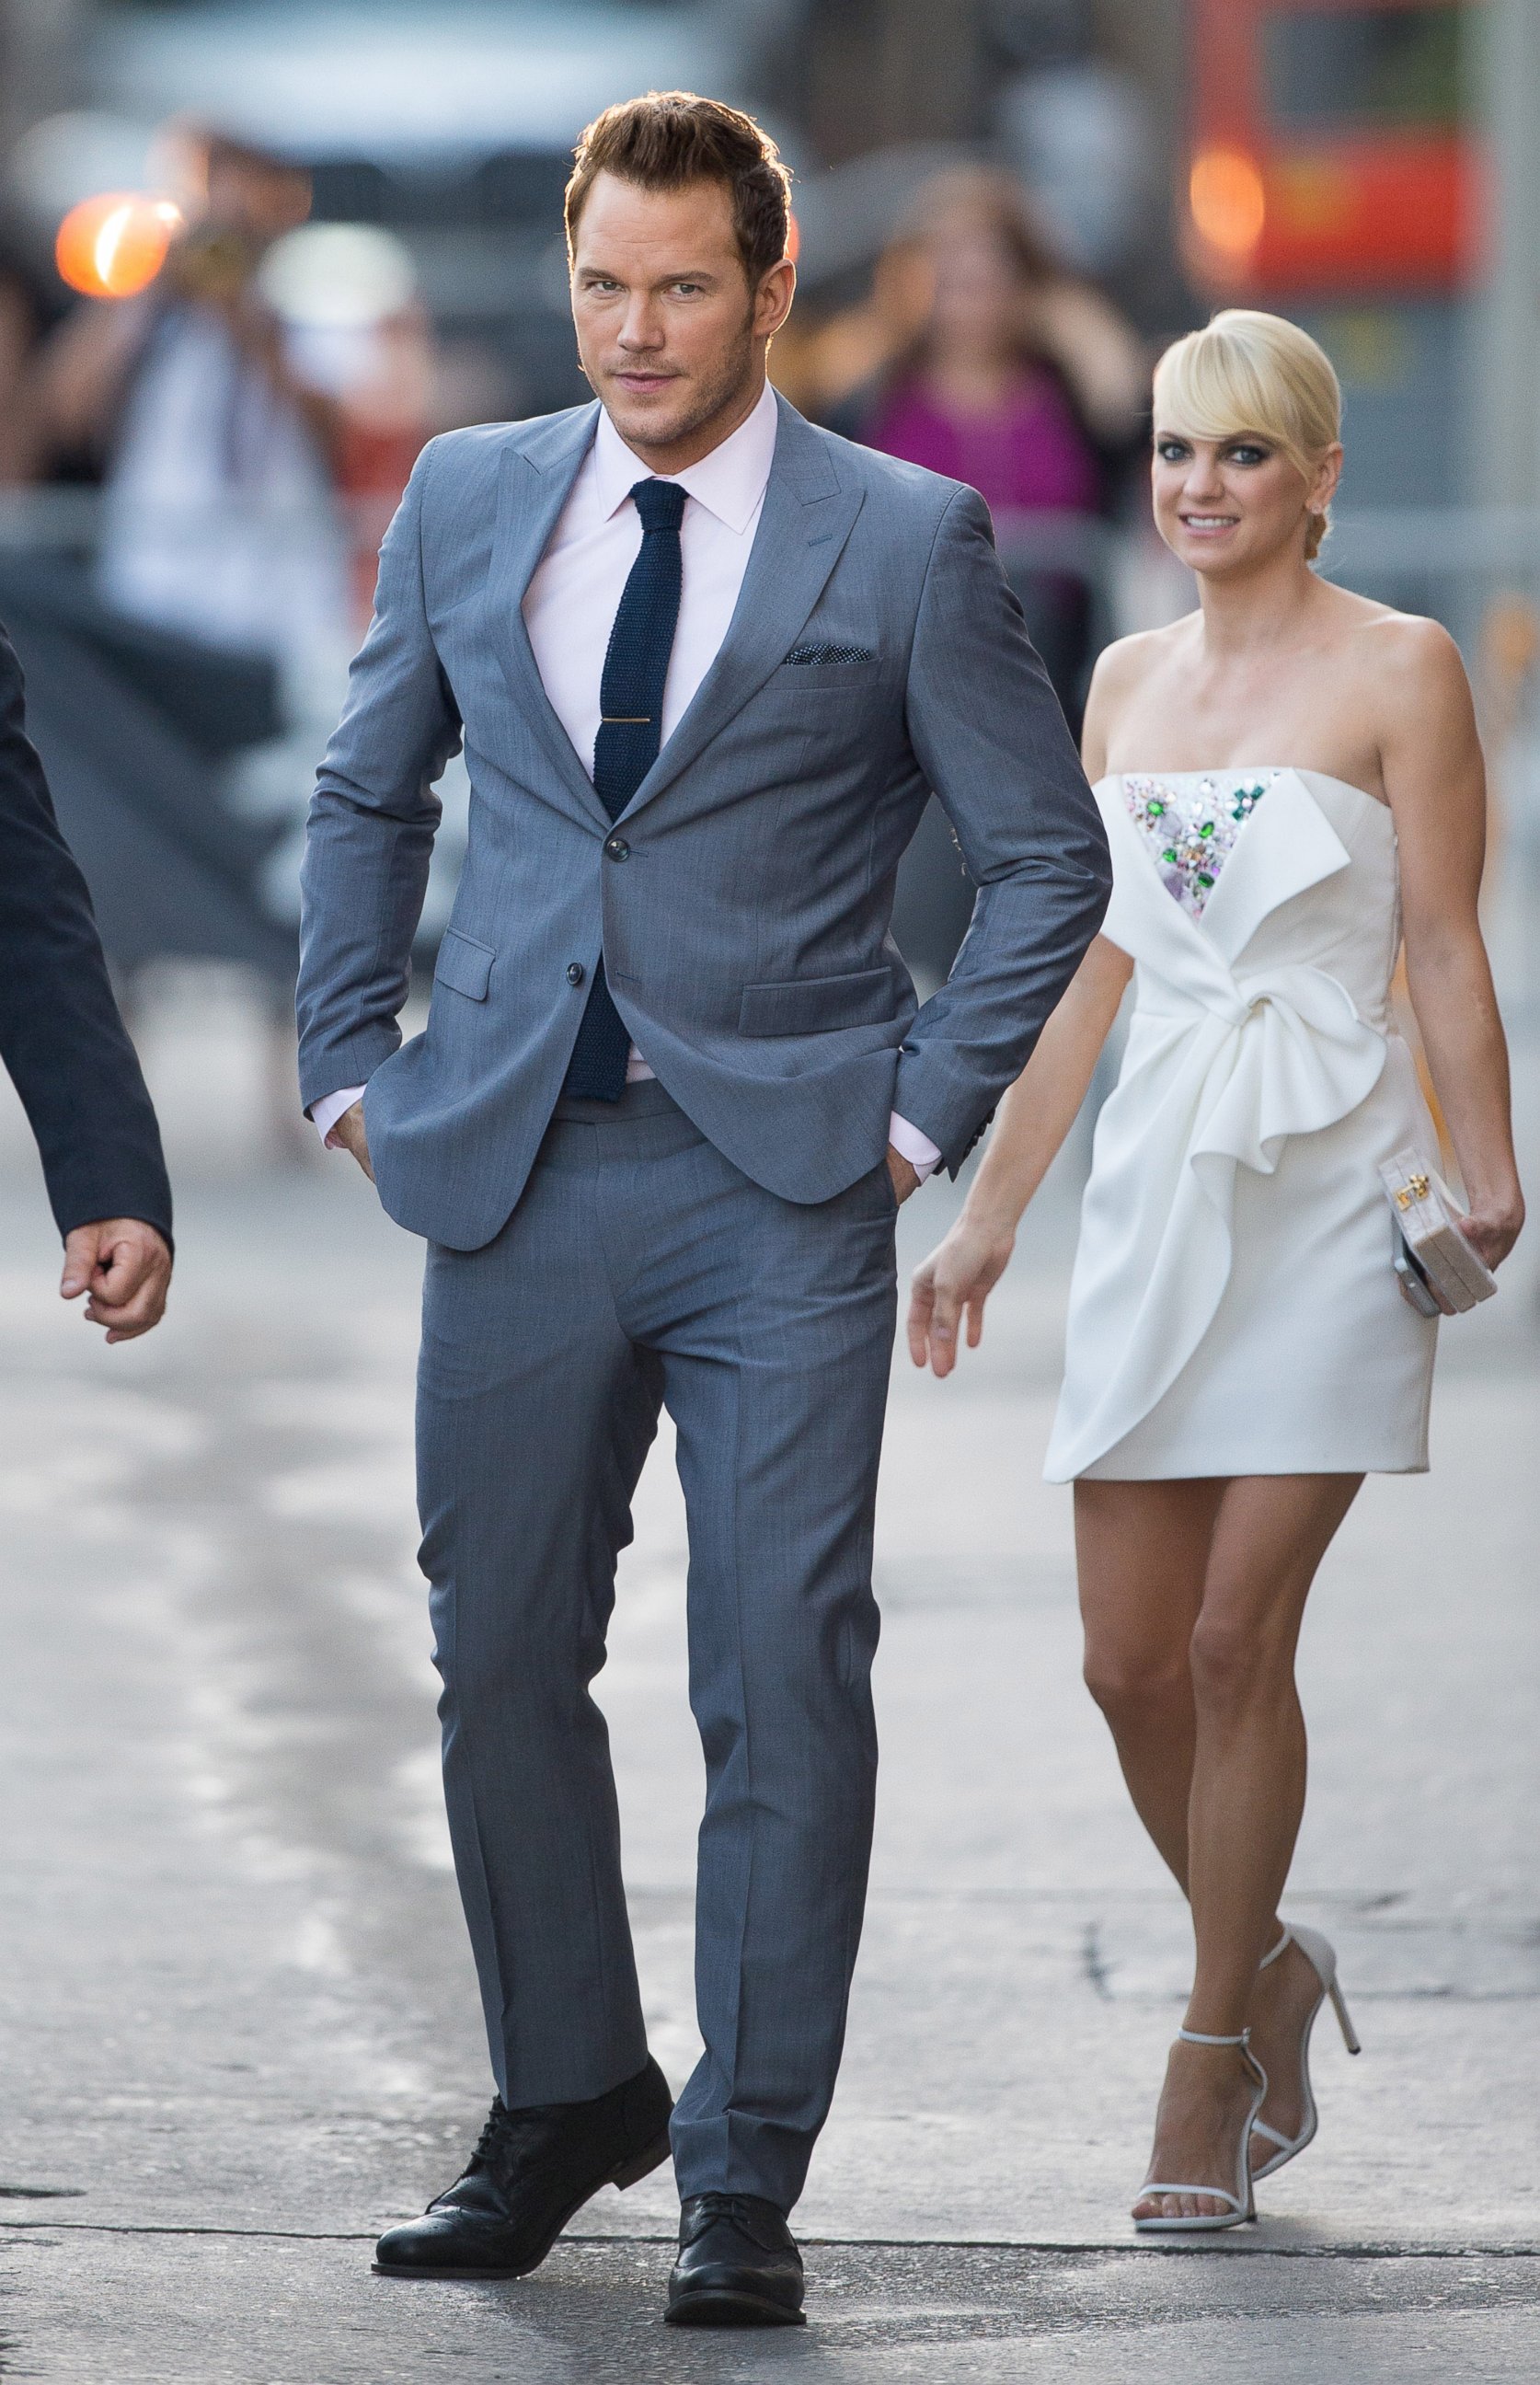 PHOTO: Chris Pratt and Anna Faris are seen on July 21, 2014 in Los Angeles, Calif.